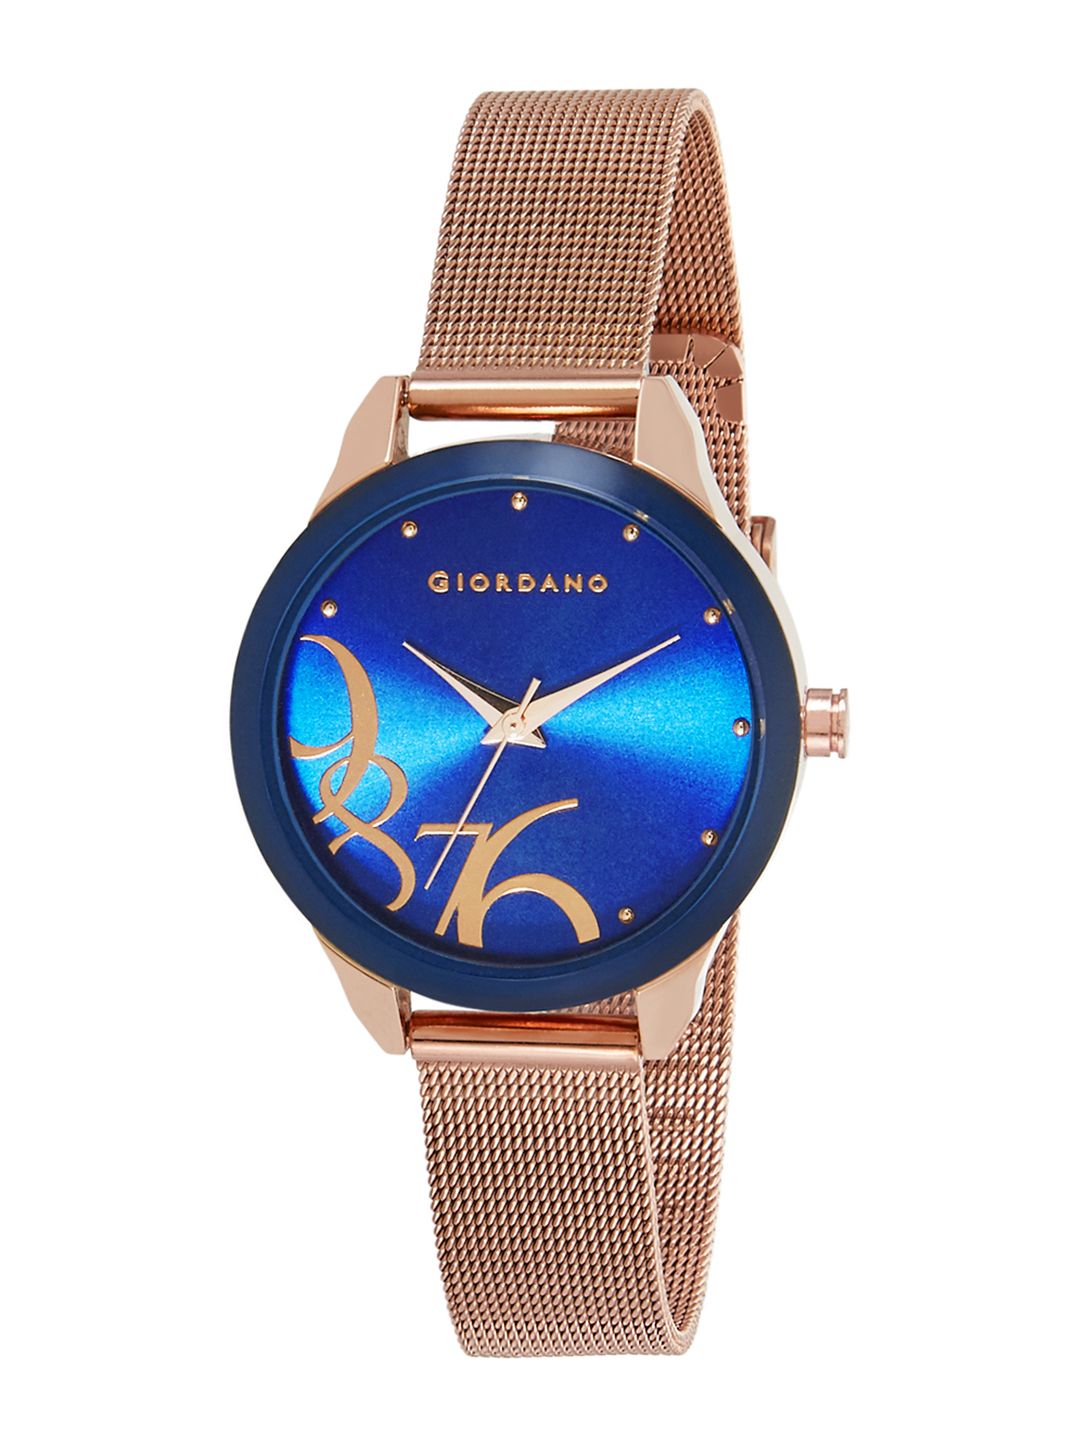 GIORDANO Women Blue & Gold-Toned Analogue Watch GD-4008-22 Price in India